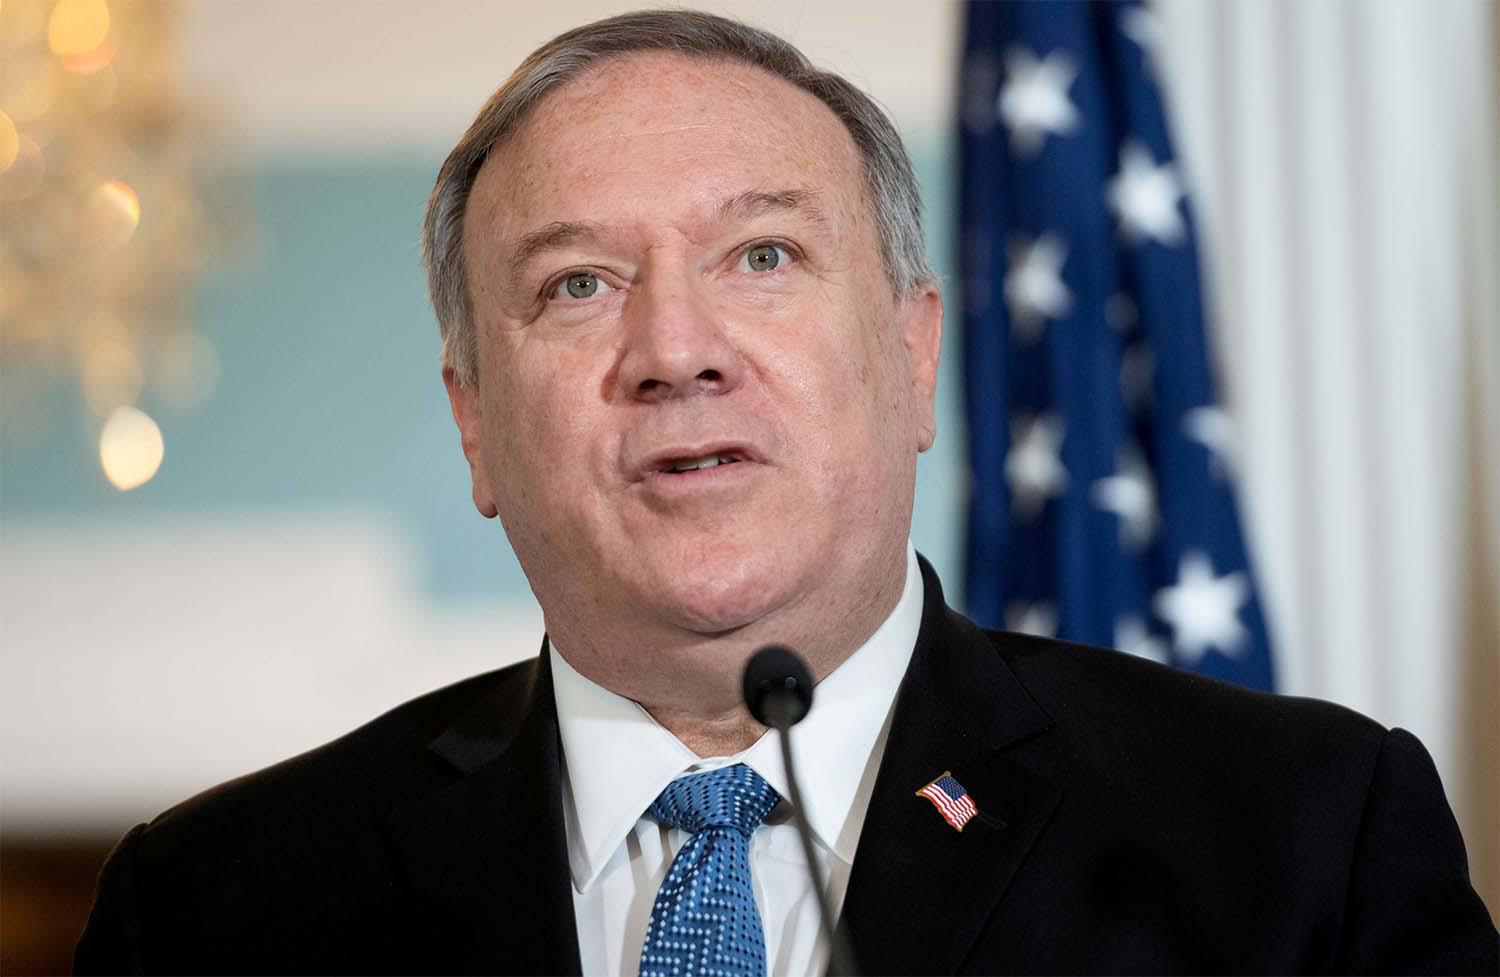 Pompeo is expected to offer details on allegations that Iran has given safe haven to al-Qaeda leaders and support for the group